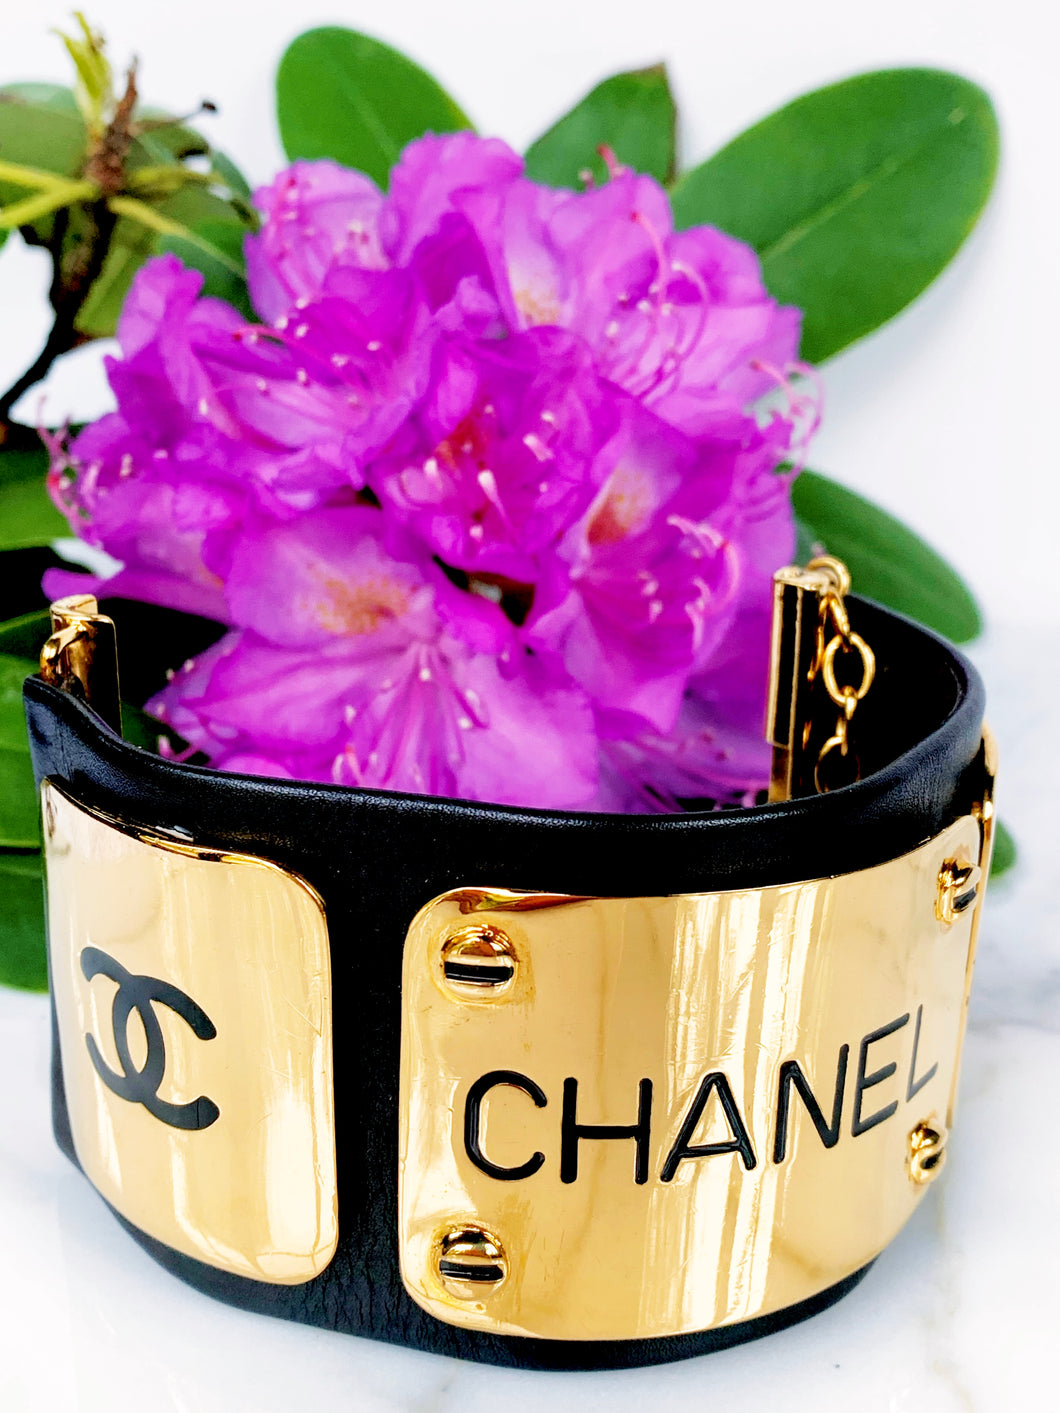 CHANEL MAGNIFICENT EXTRA WIDE LEATHER GOLD NAME PLATE PLAQUE HIPHOP CUFF BRACELET